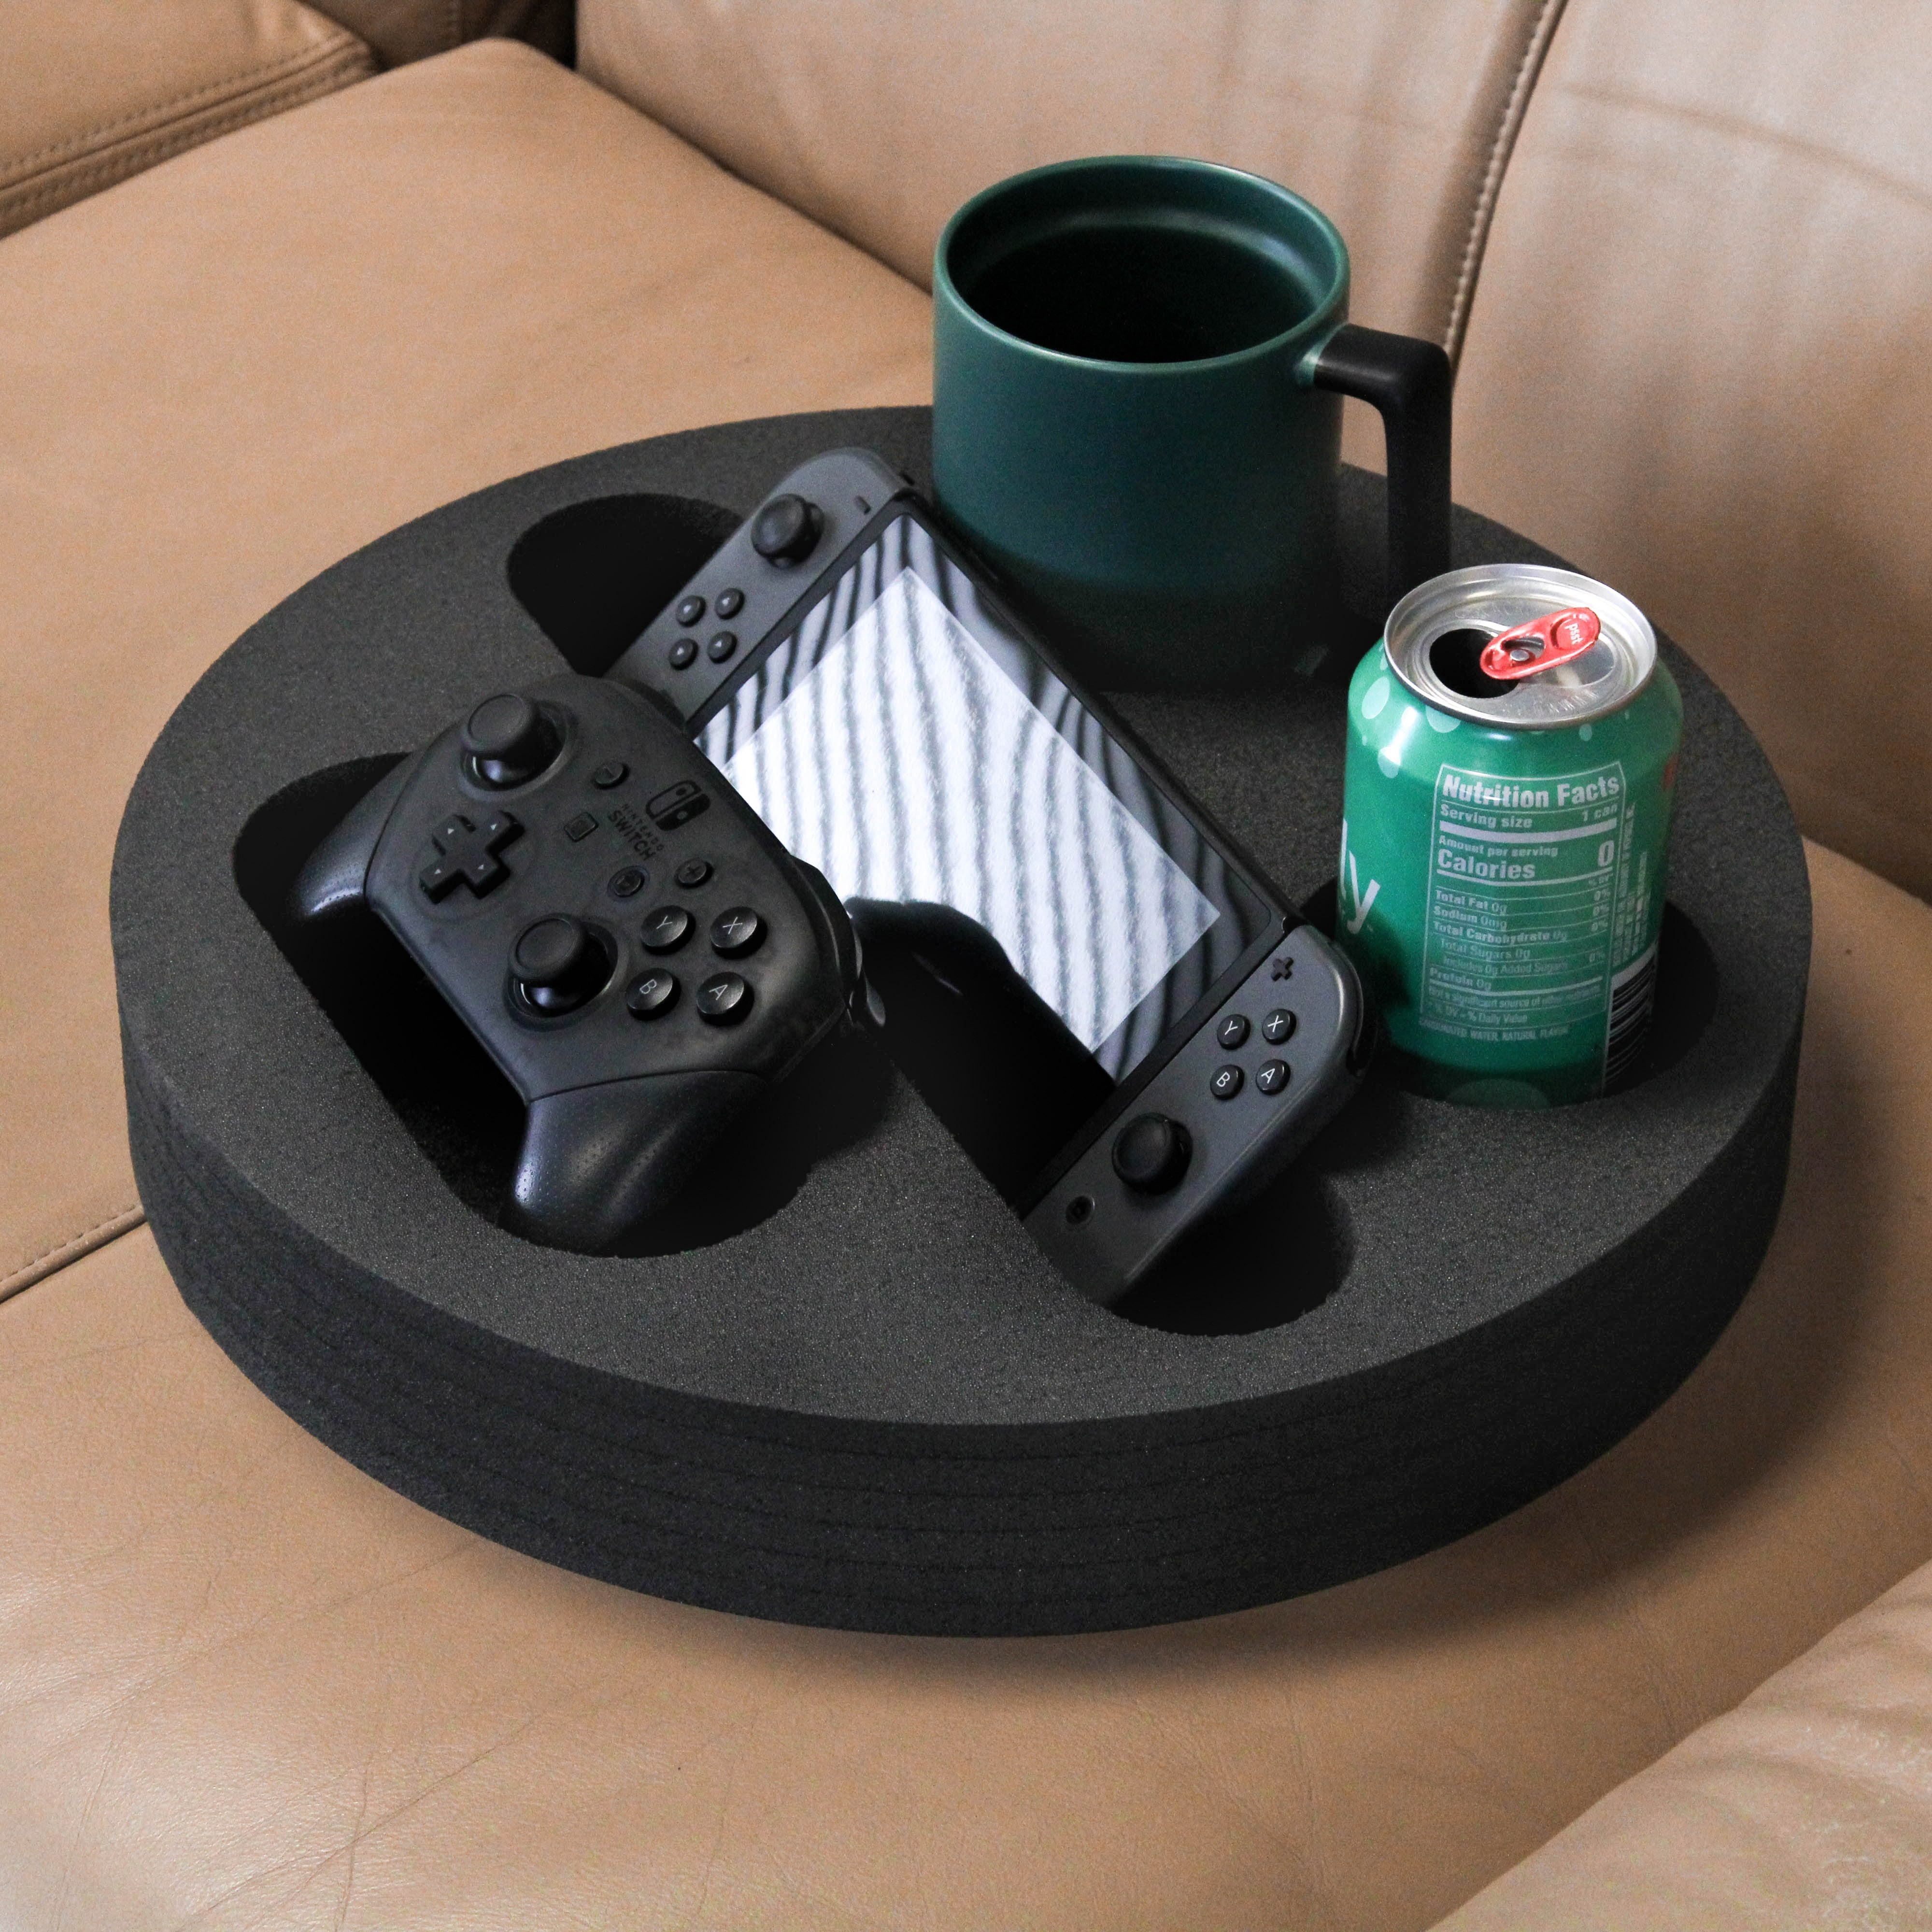 Couch Drink Holder Refreshment Tray for Sofa Bed Floor Car RV Lounge TV Room Black Foam 4 Compartments with Game Controller Slot 13.75 Inches Wide